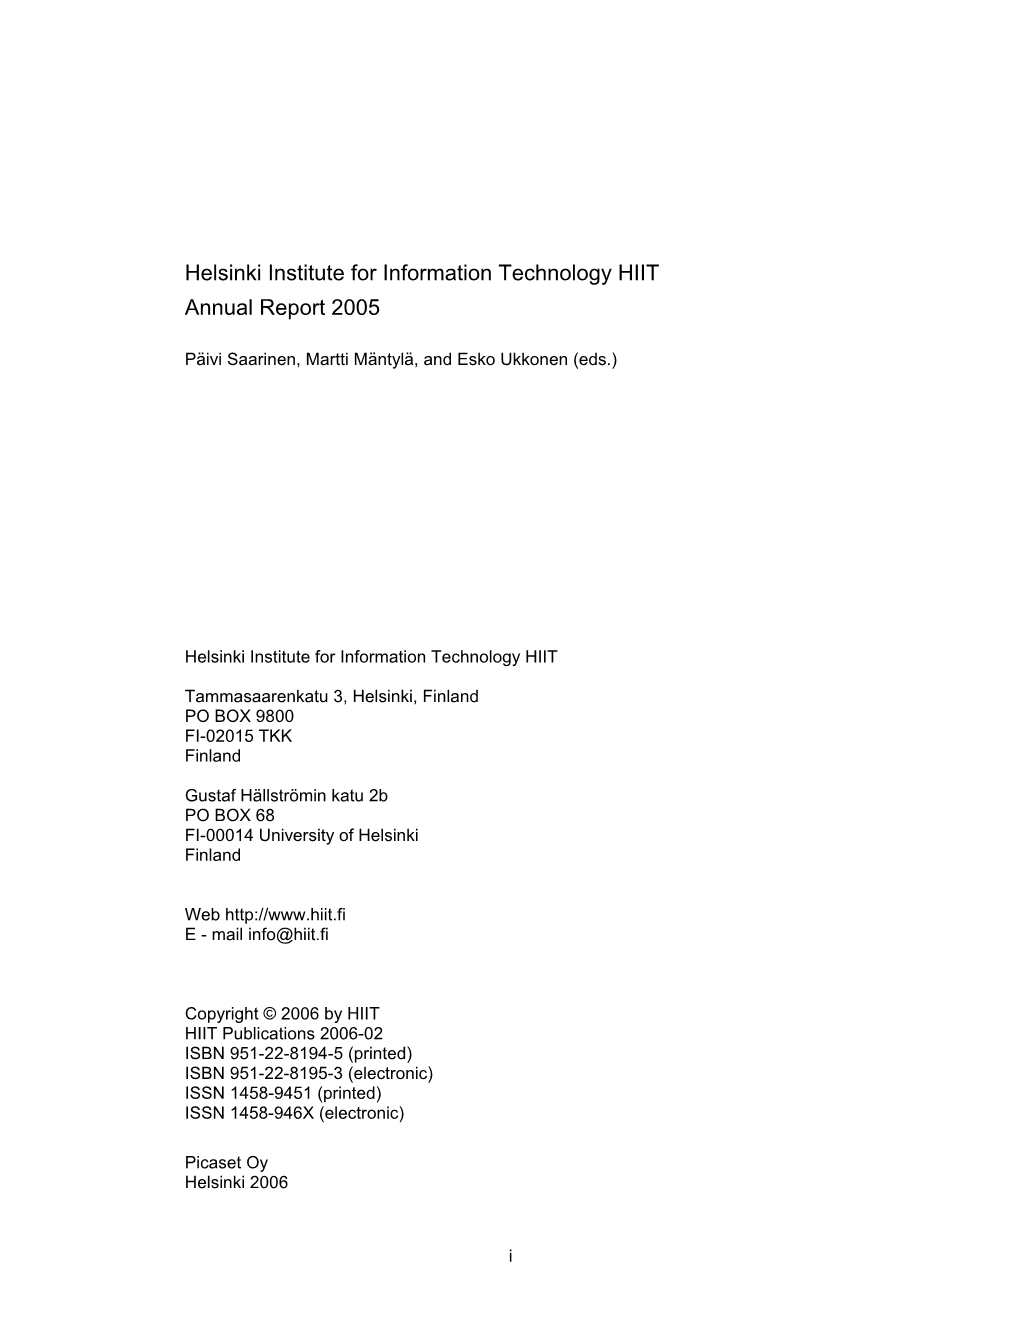 Helsinki Institute for Information Technology HIIT Annual Report 2005